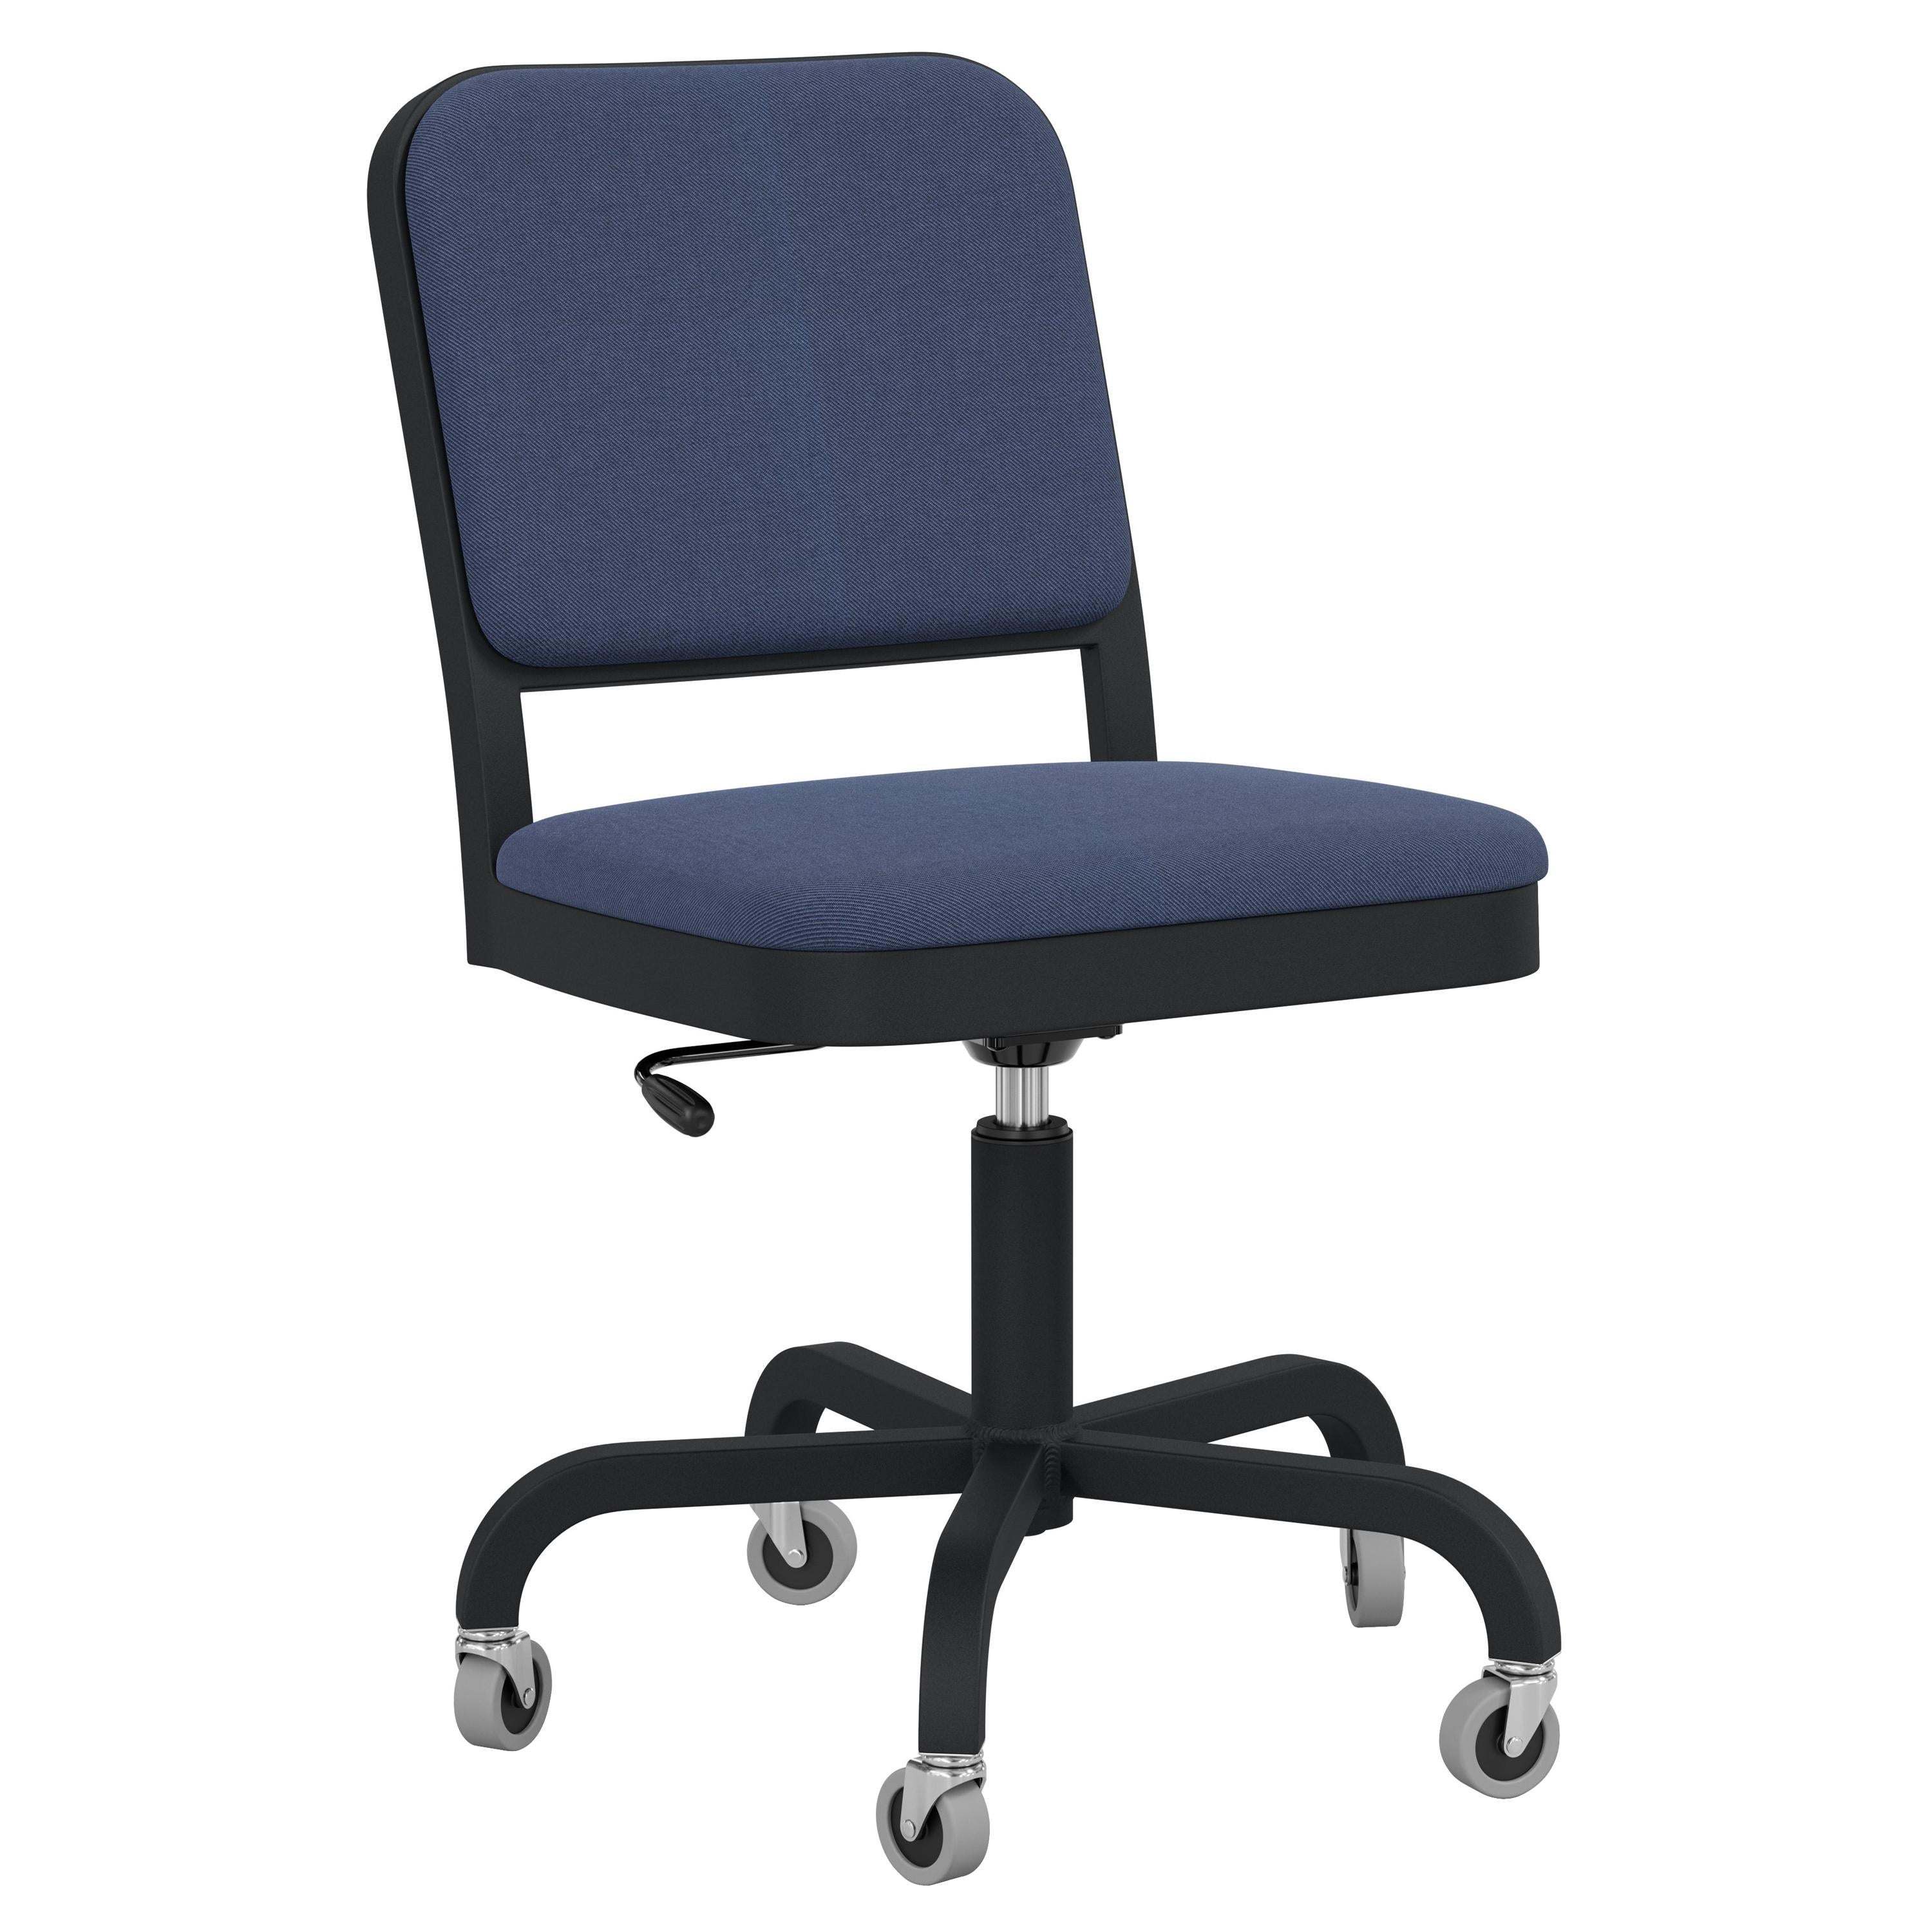 Emeco Navy Officer Swivel Chair in Navy Blue Fabric with Black Aluminum Frame